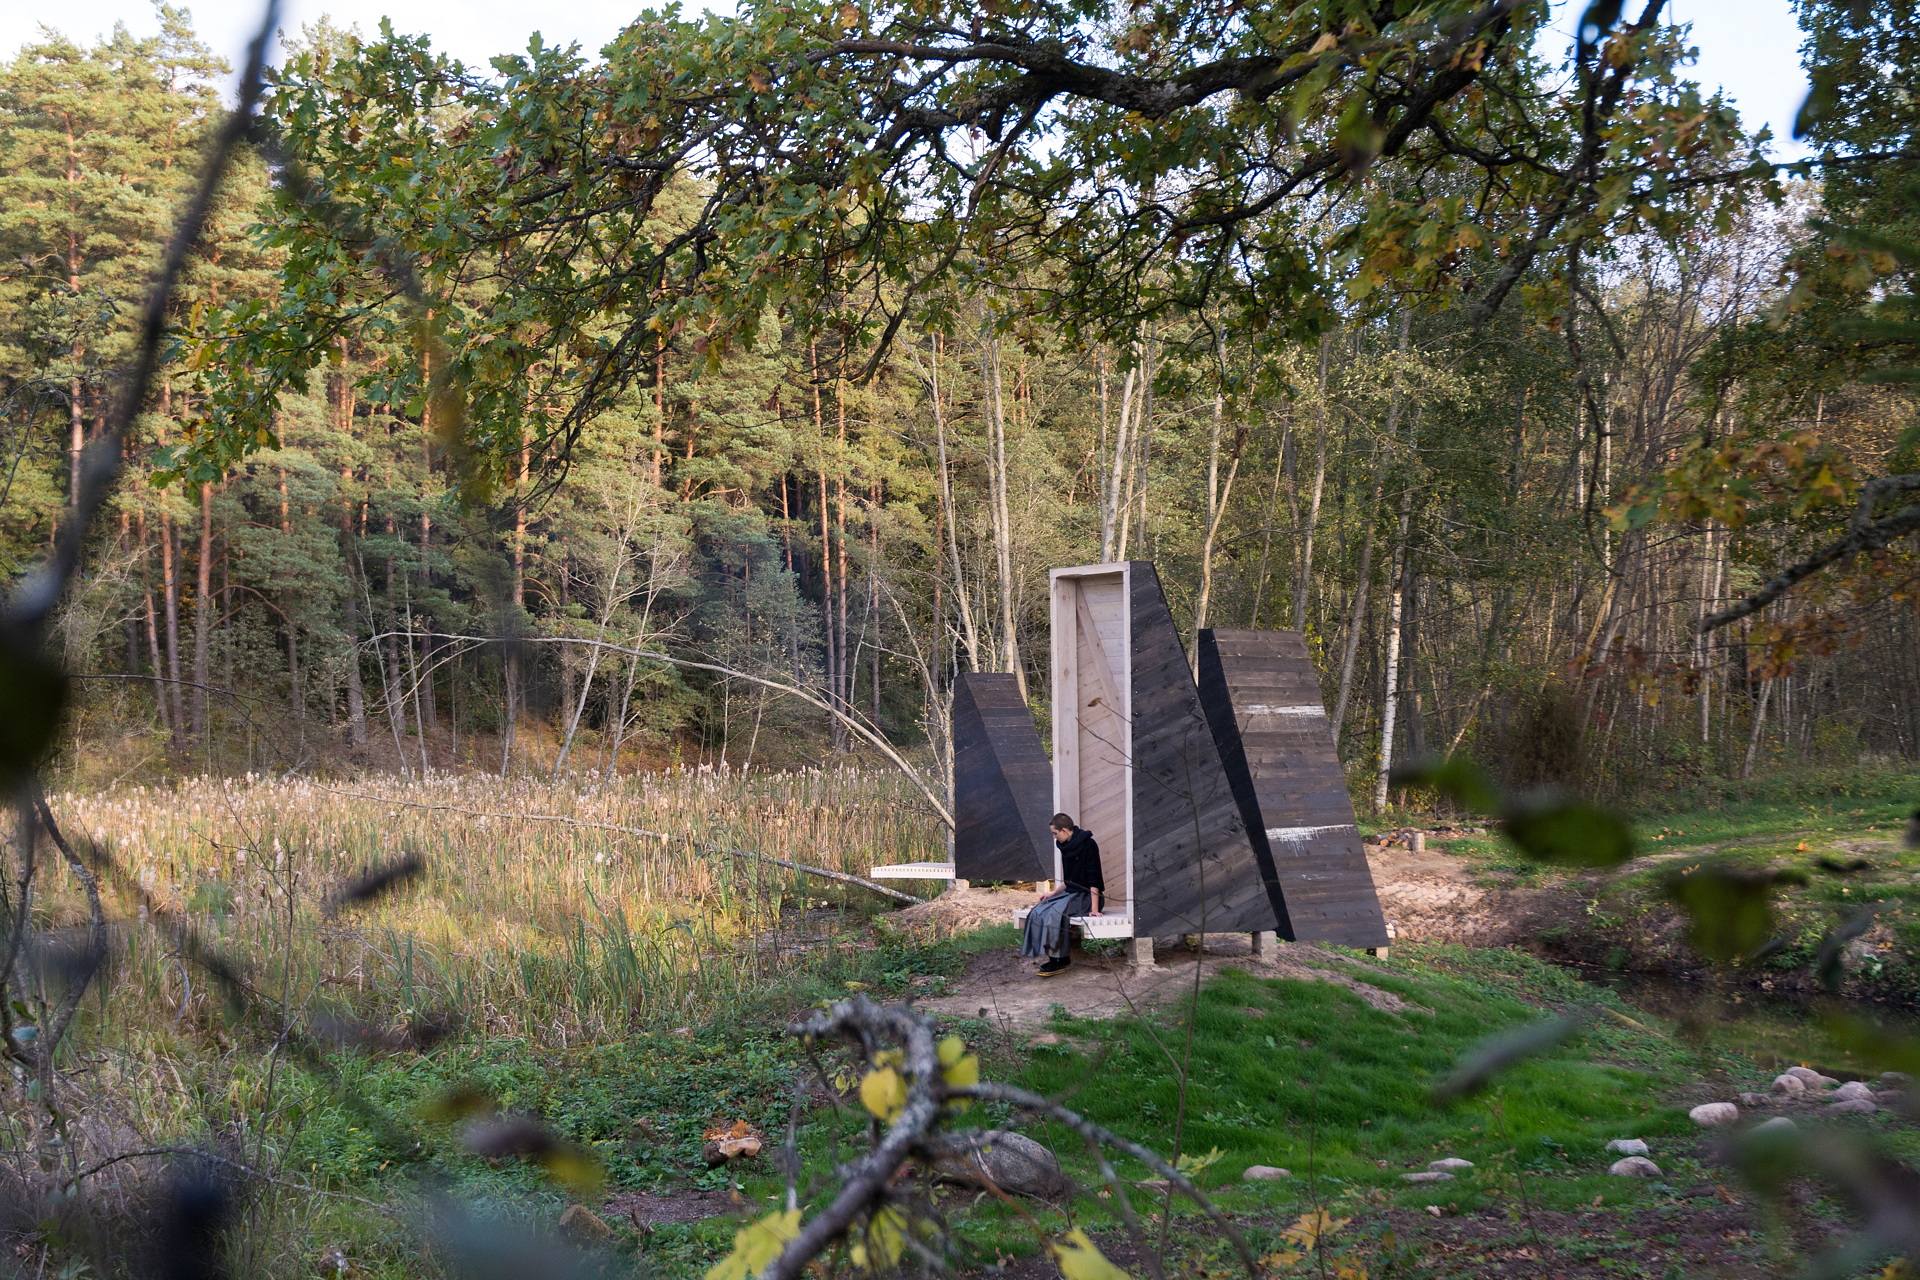 To increase Develop native A meditation garden in the Lithuanian forest | Livegreenblog